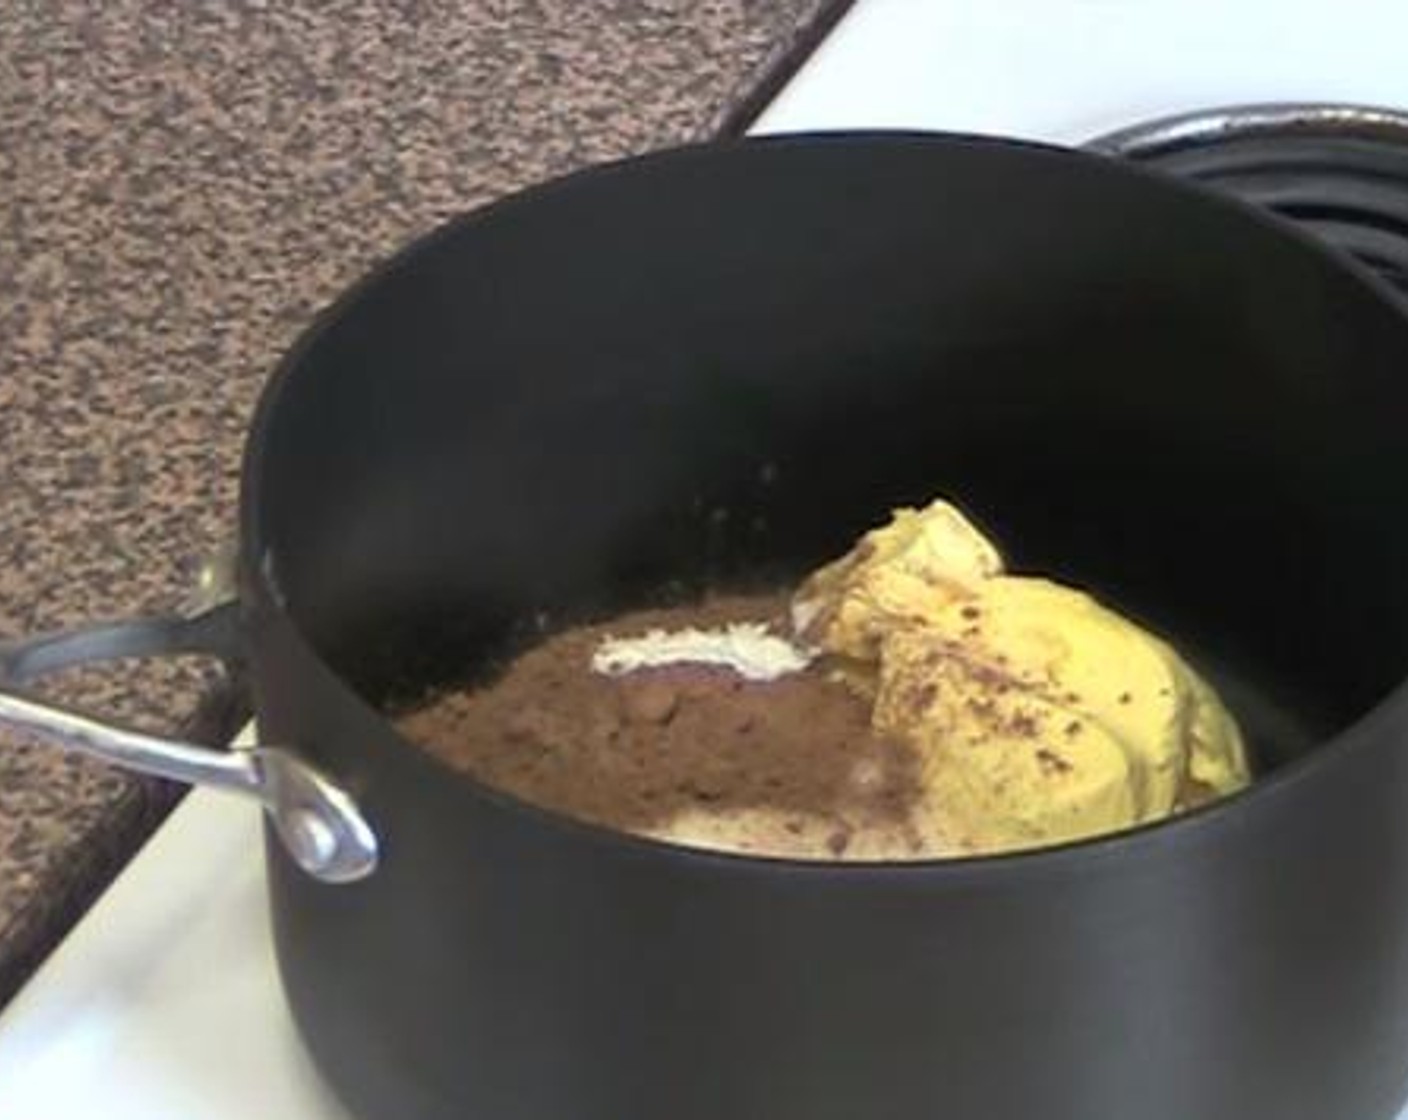 step 1 Into a saucepan under low heat, add and mix the Caster Sugar (1/2 cup), Butter (2/3 cup), Baking Soda (1/2 tsp), Unsweetened Cocoa Powder (2 Tbsp), and Water (1 cup). Turn the heat up to high, and let the mixture come to a boil.